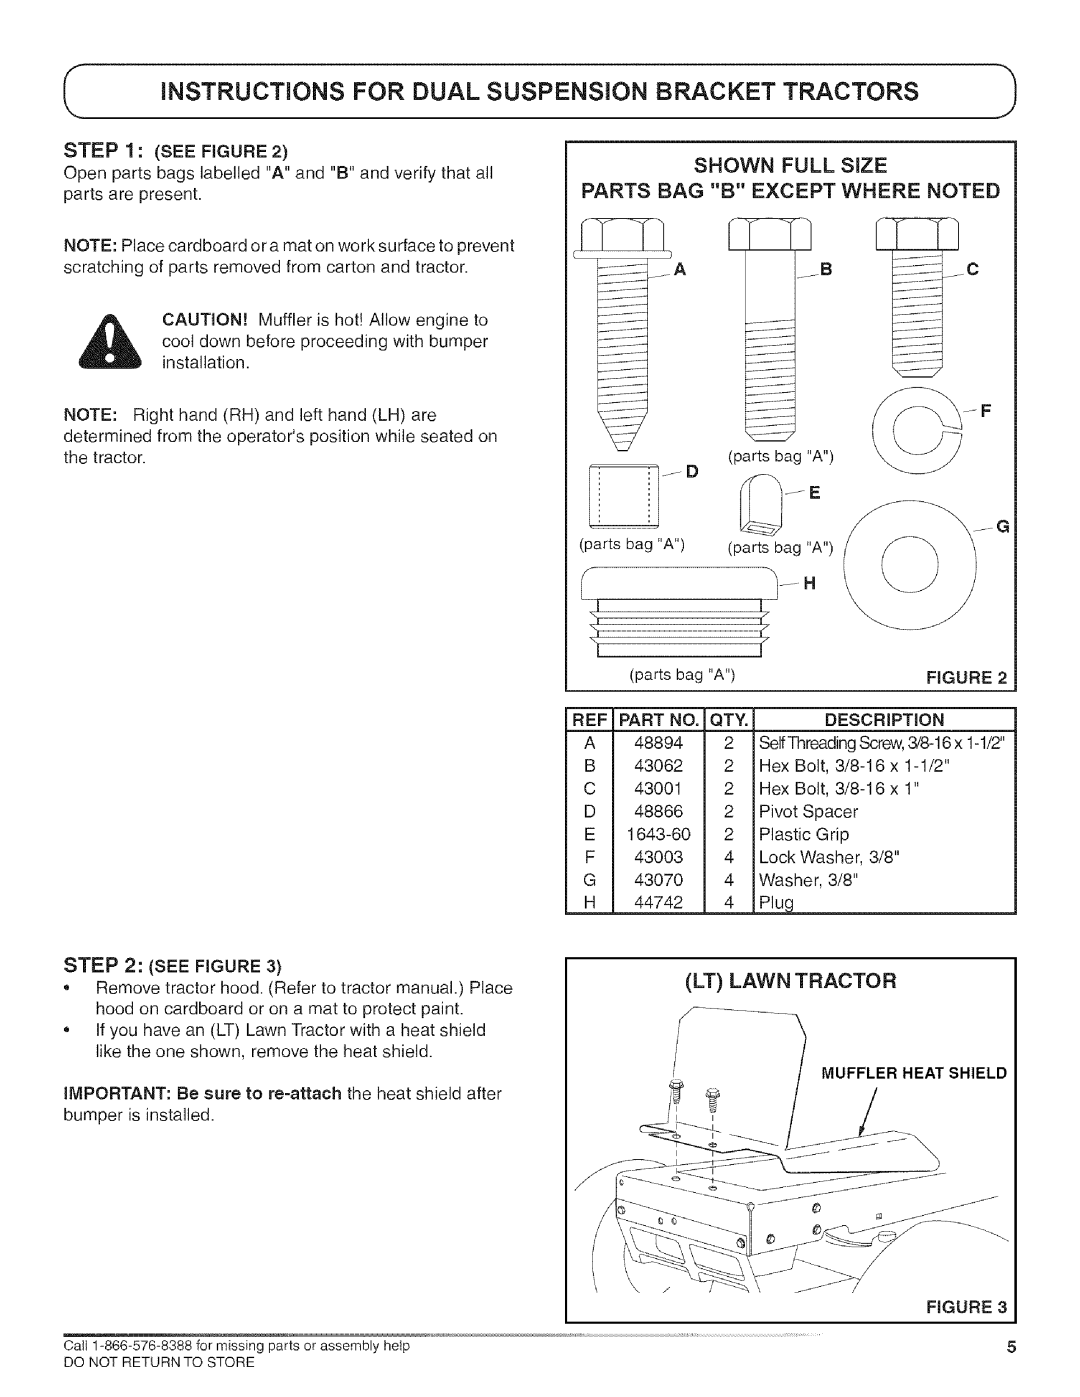 Craftsman 486.246232 Instructions For Dual Suspension Bracket Tractors, SHOWN FULL SiZE PARTS BAG B EXCEPT WHERE NOTED 